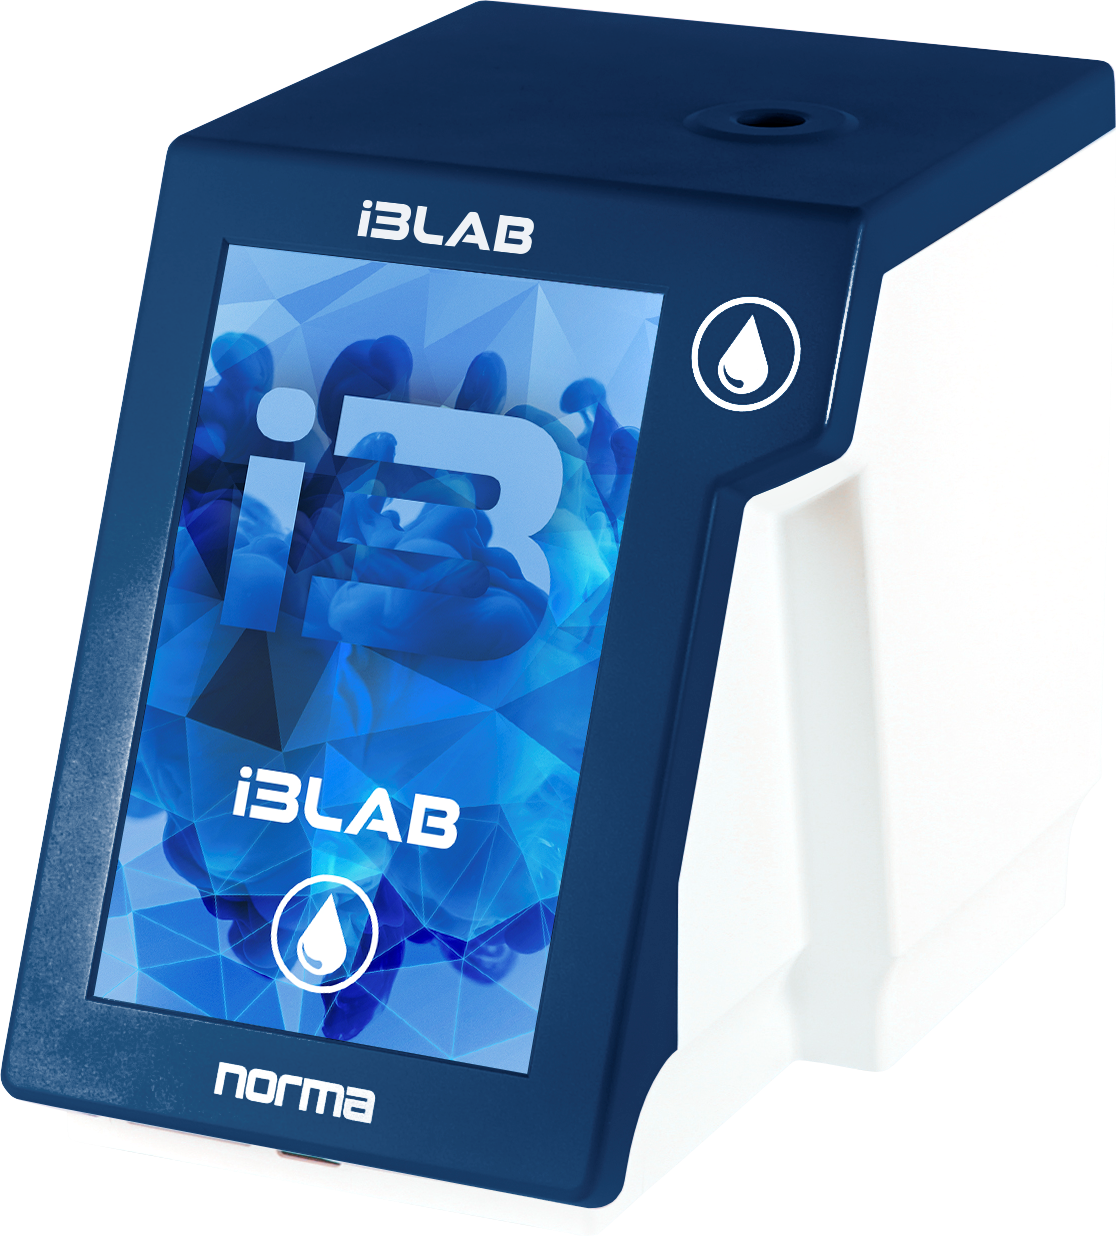 Norma i3LAB, a 3-diff hematology analyzer with closed vial sampling designed for labs